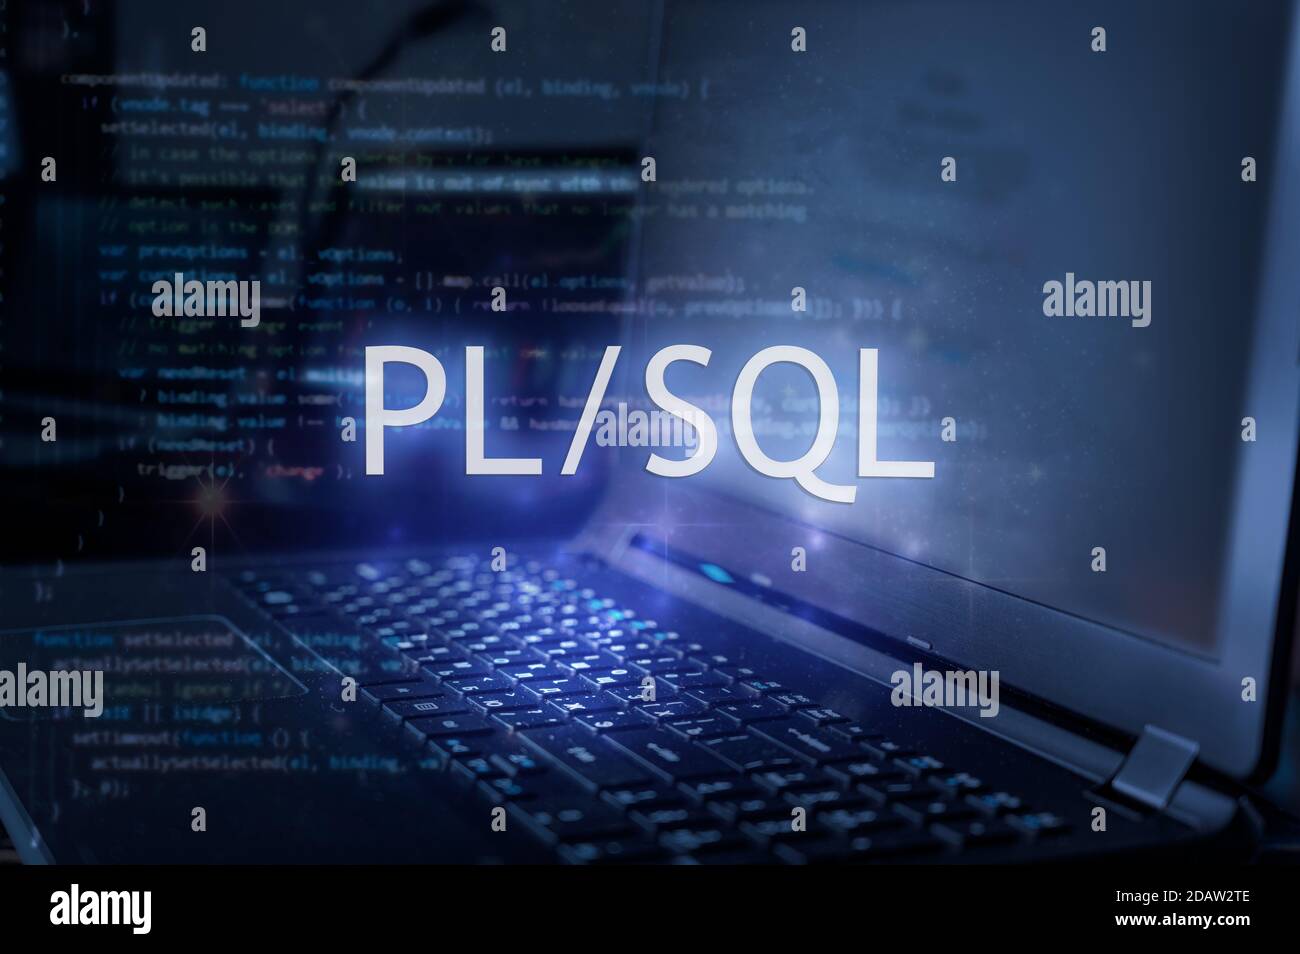 PL/SQL inscription against laptop and code background. Learn pl/sql programming language, computer courses, training. Stock Photo